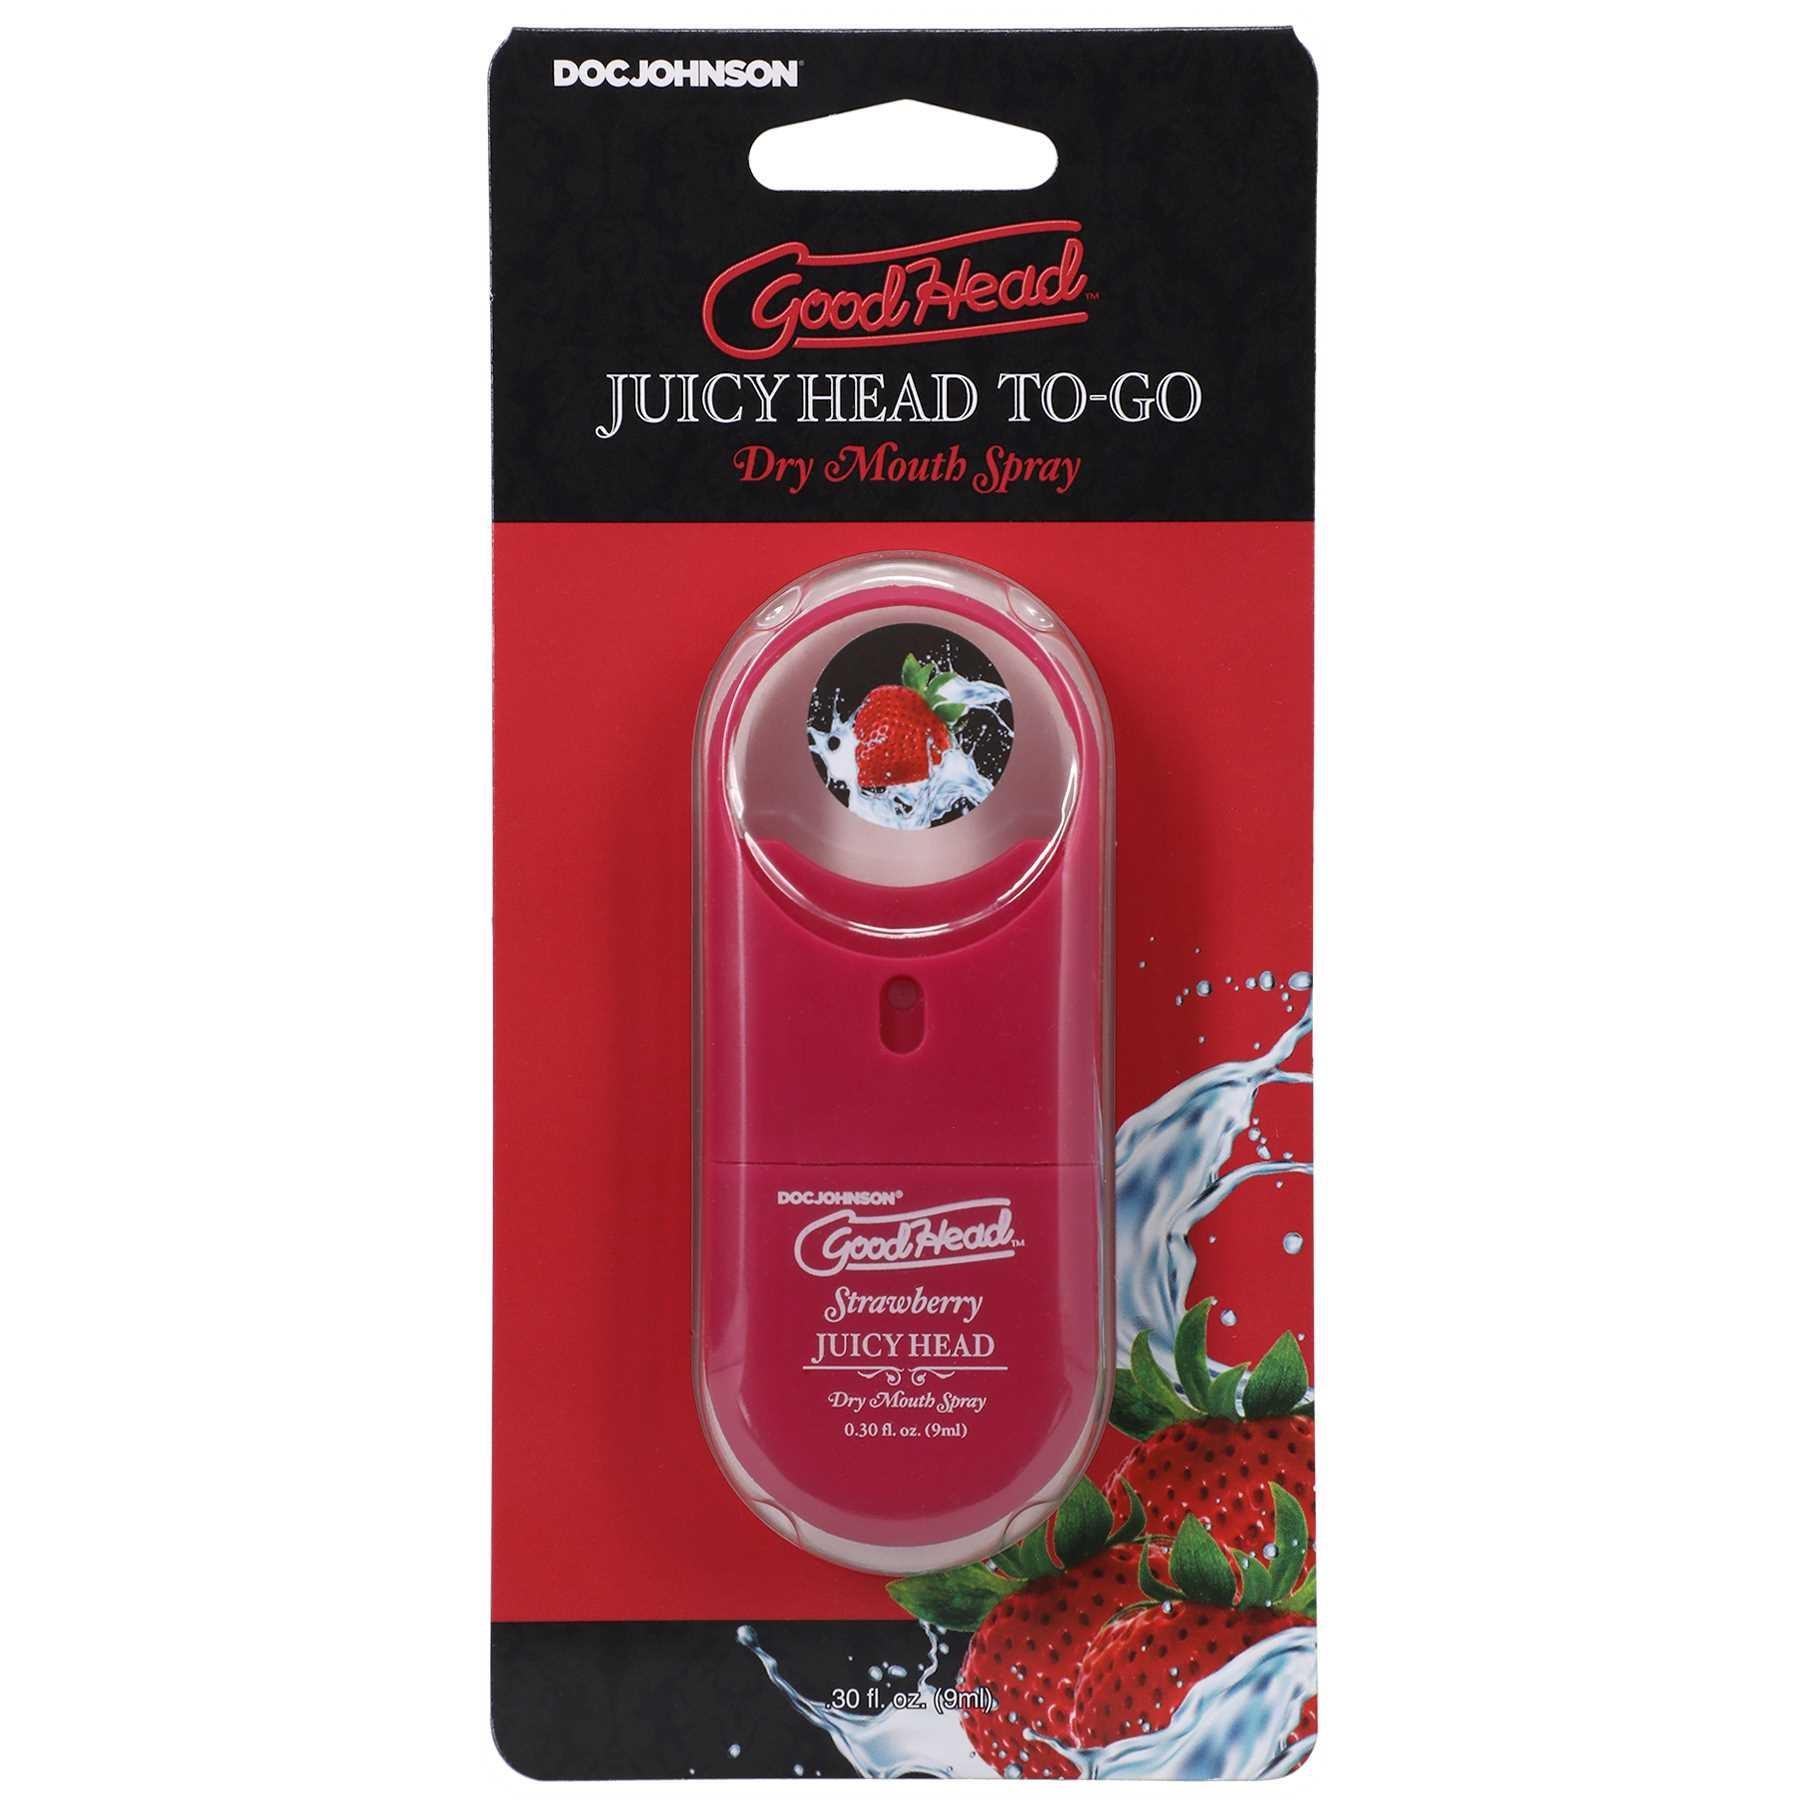 GoodHead - Juicy Head Dry Mouth Spray To-Go - Strawberry - .30 fl. oz. front package